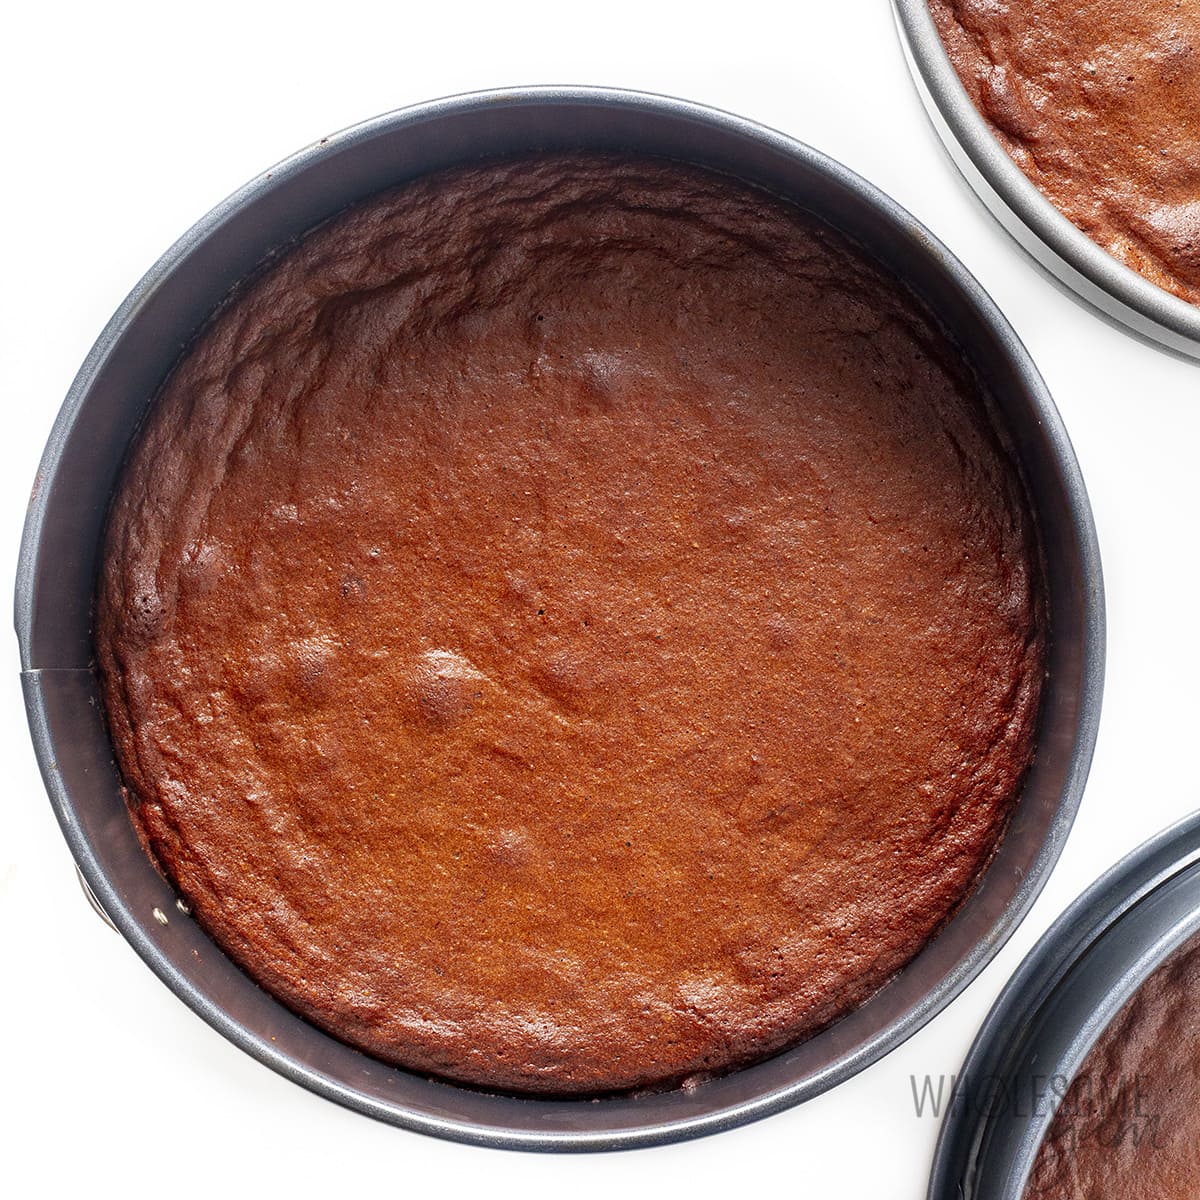 Baked cakes in pans.